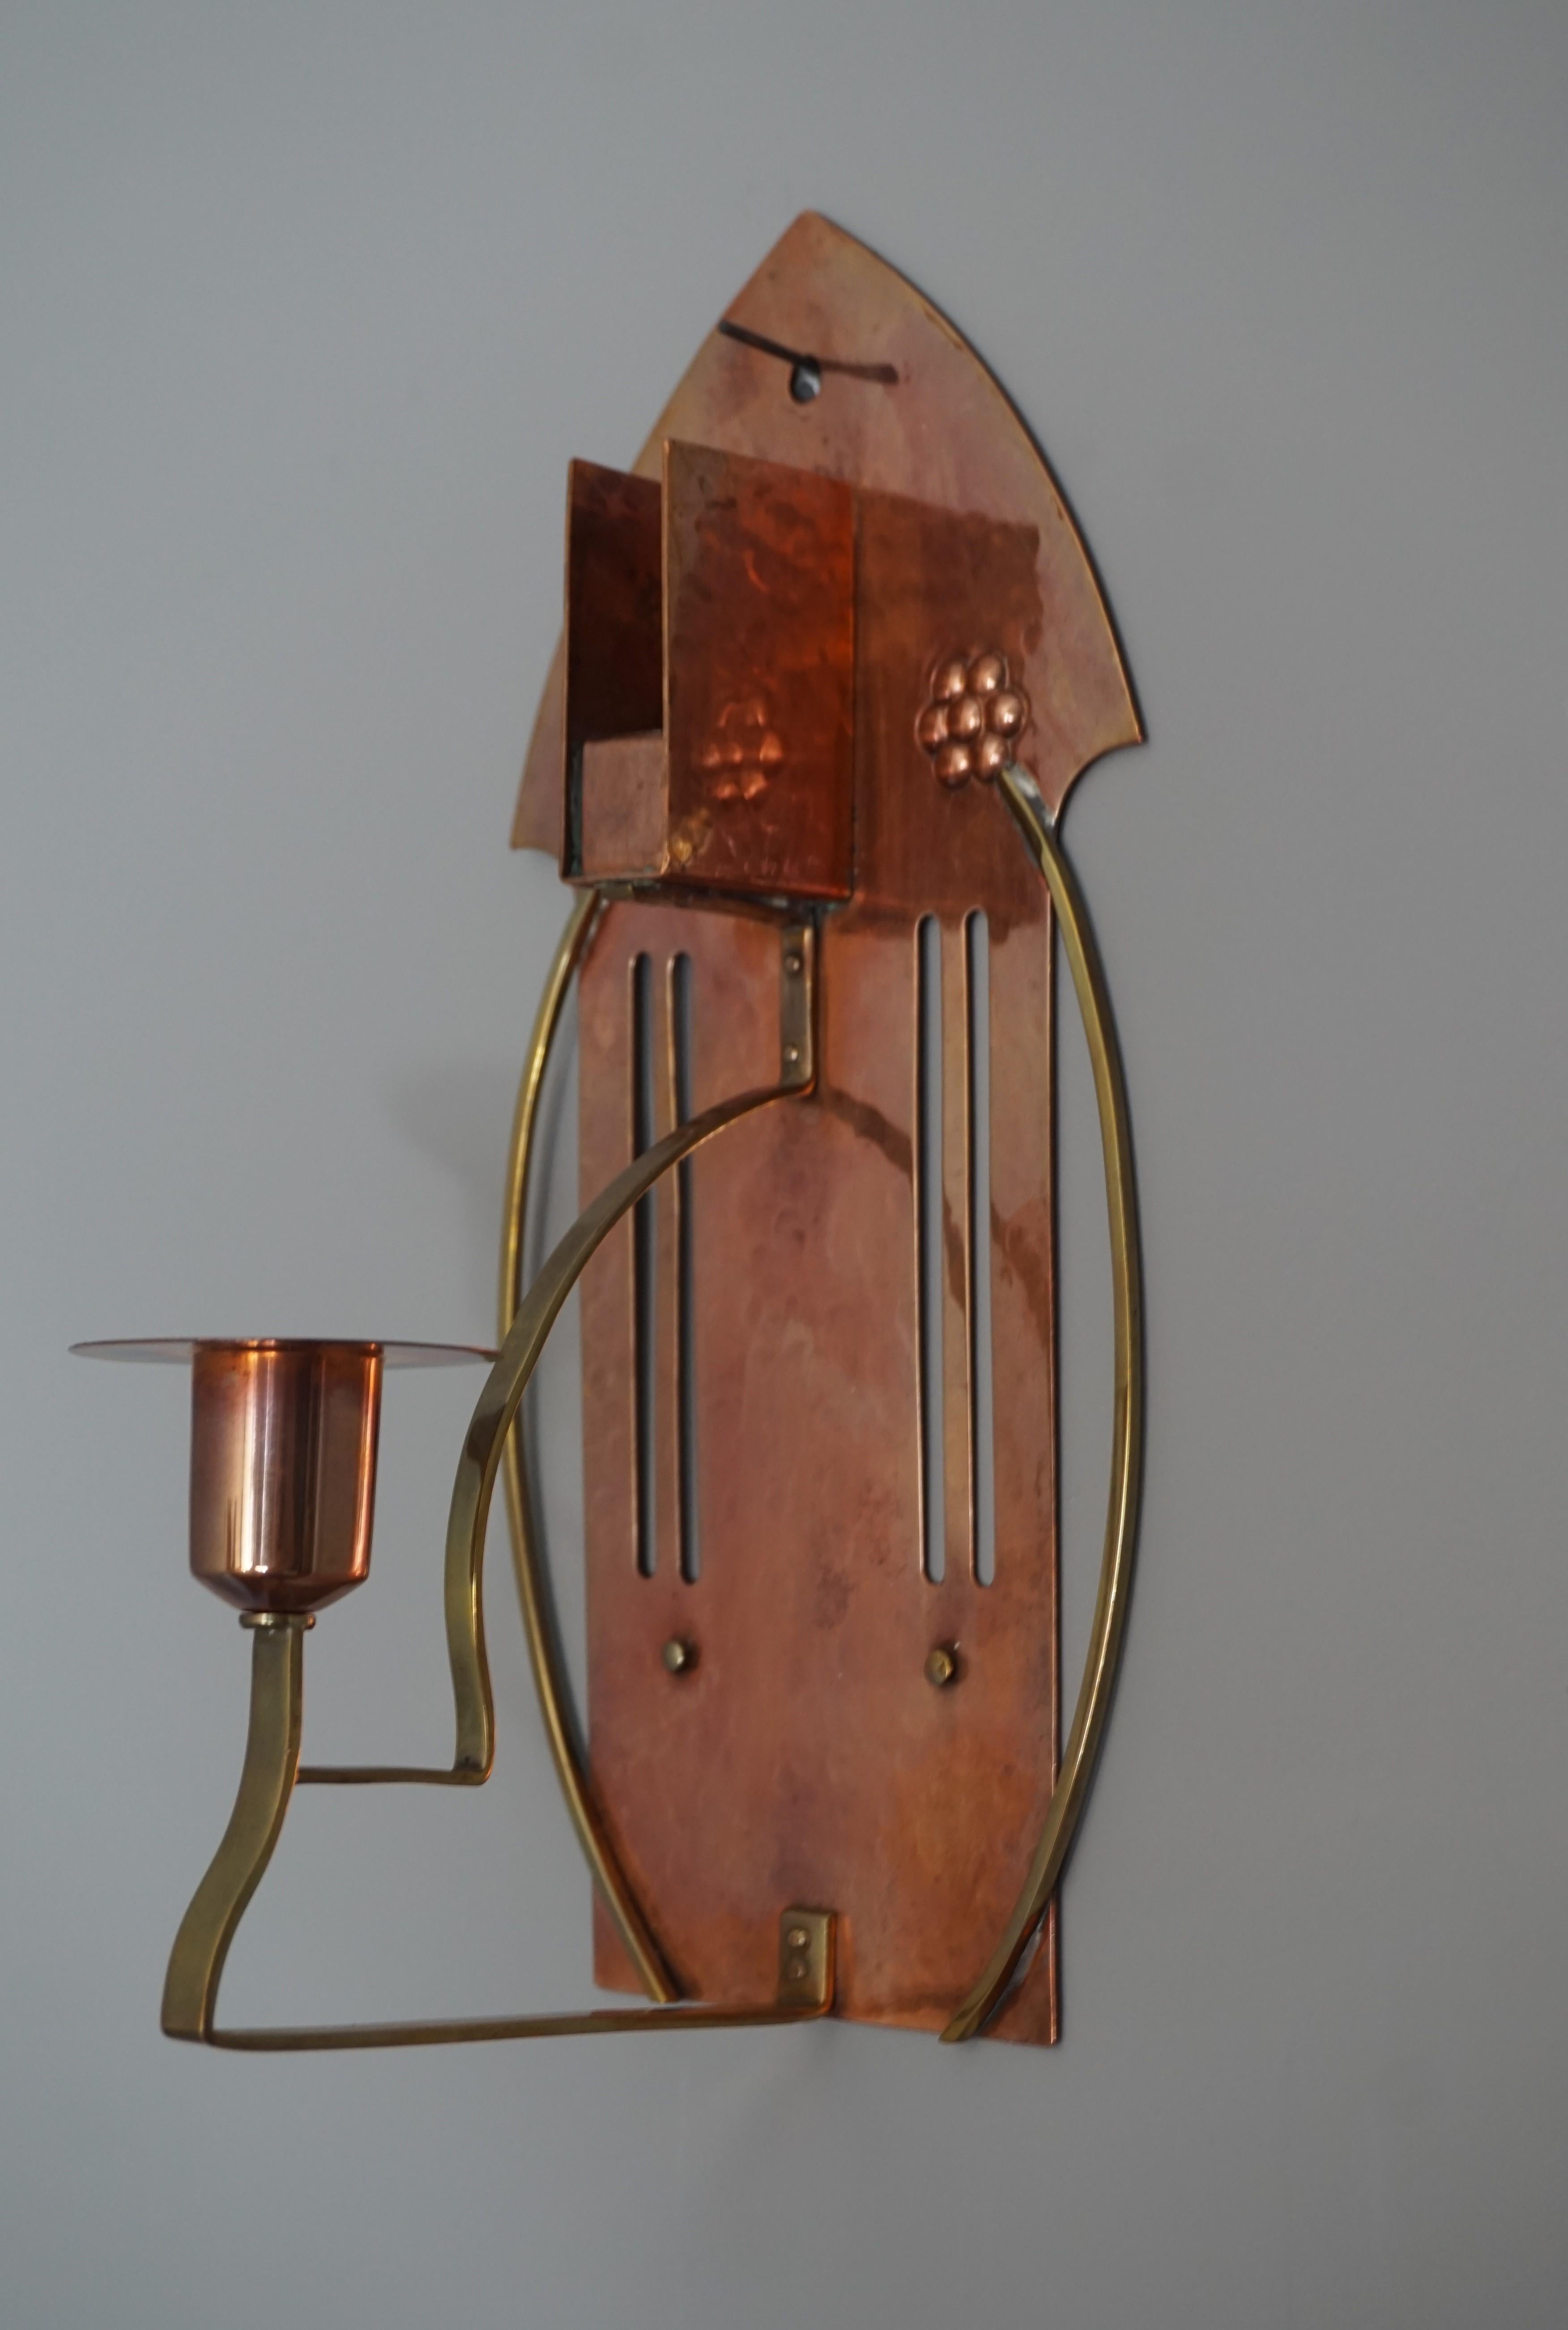 20th Century Arts & Crafts Copper & Brass Wall Sconce Candle and Match Box Holder by WMF